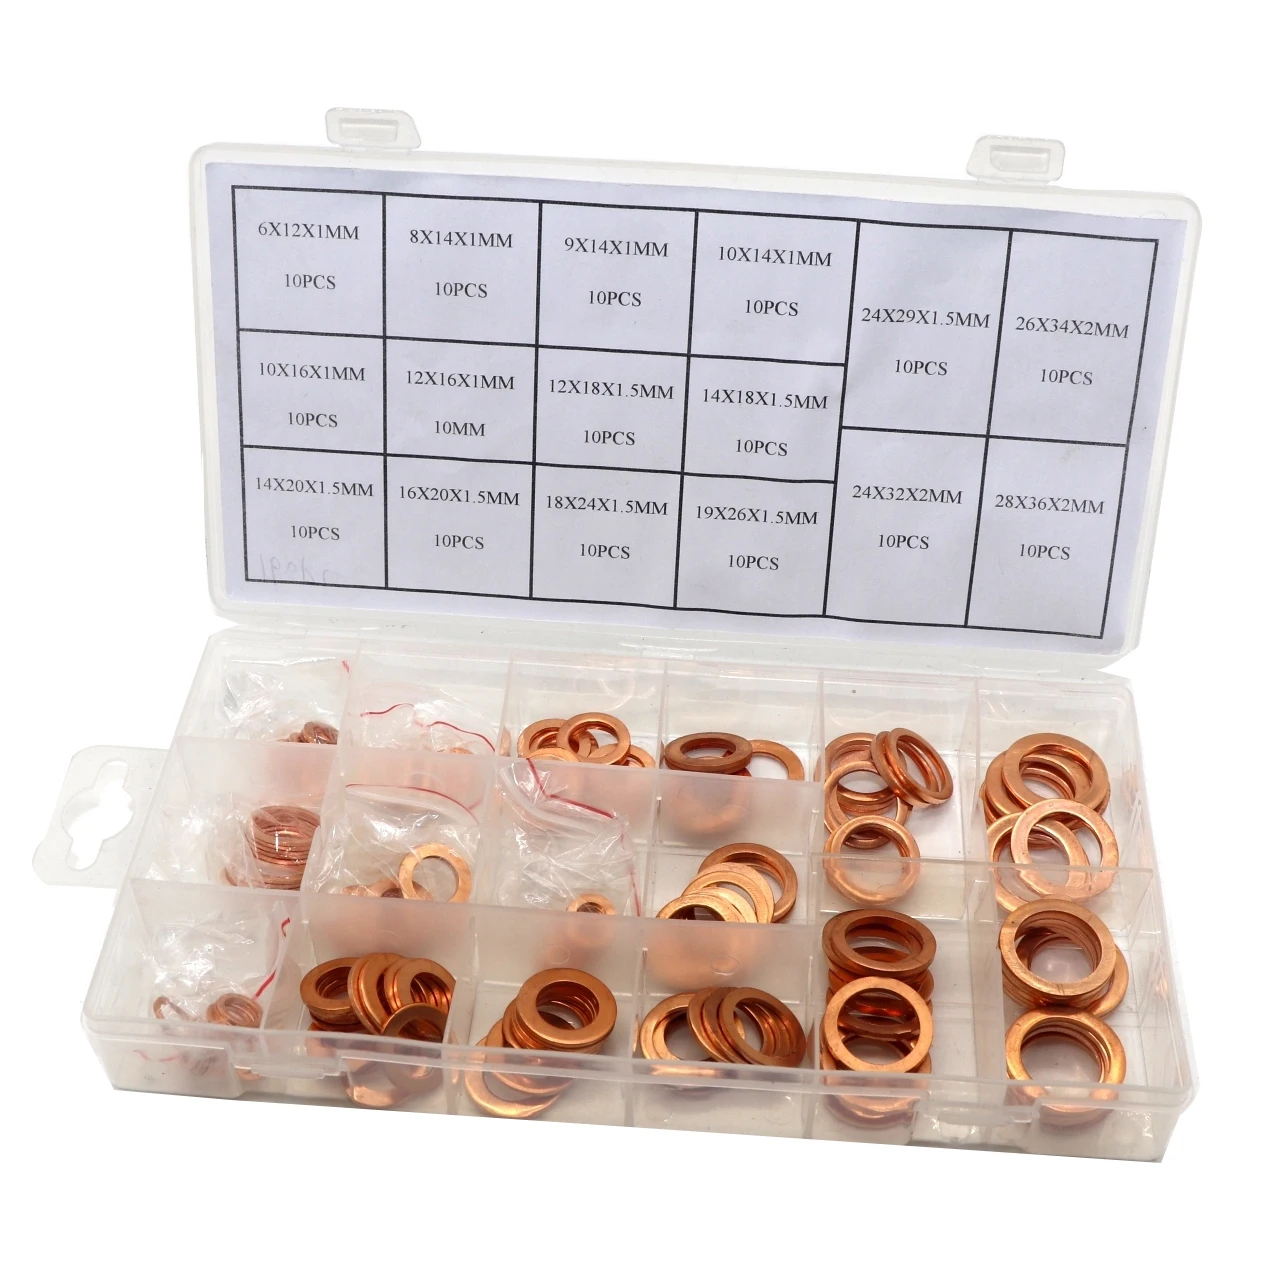 300pcs Assorted Solid Copper Crush Washers Seal Flat Ring Hydraulic Fittings Set 